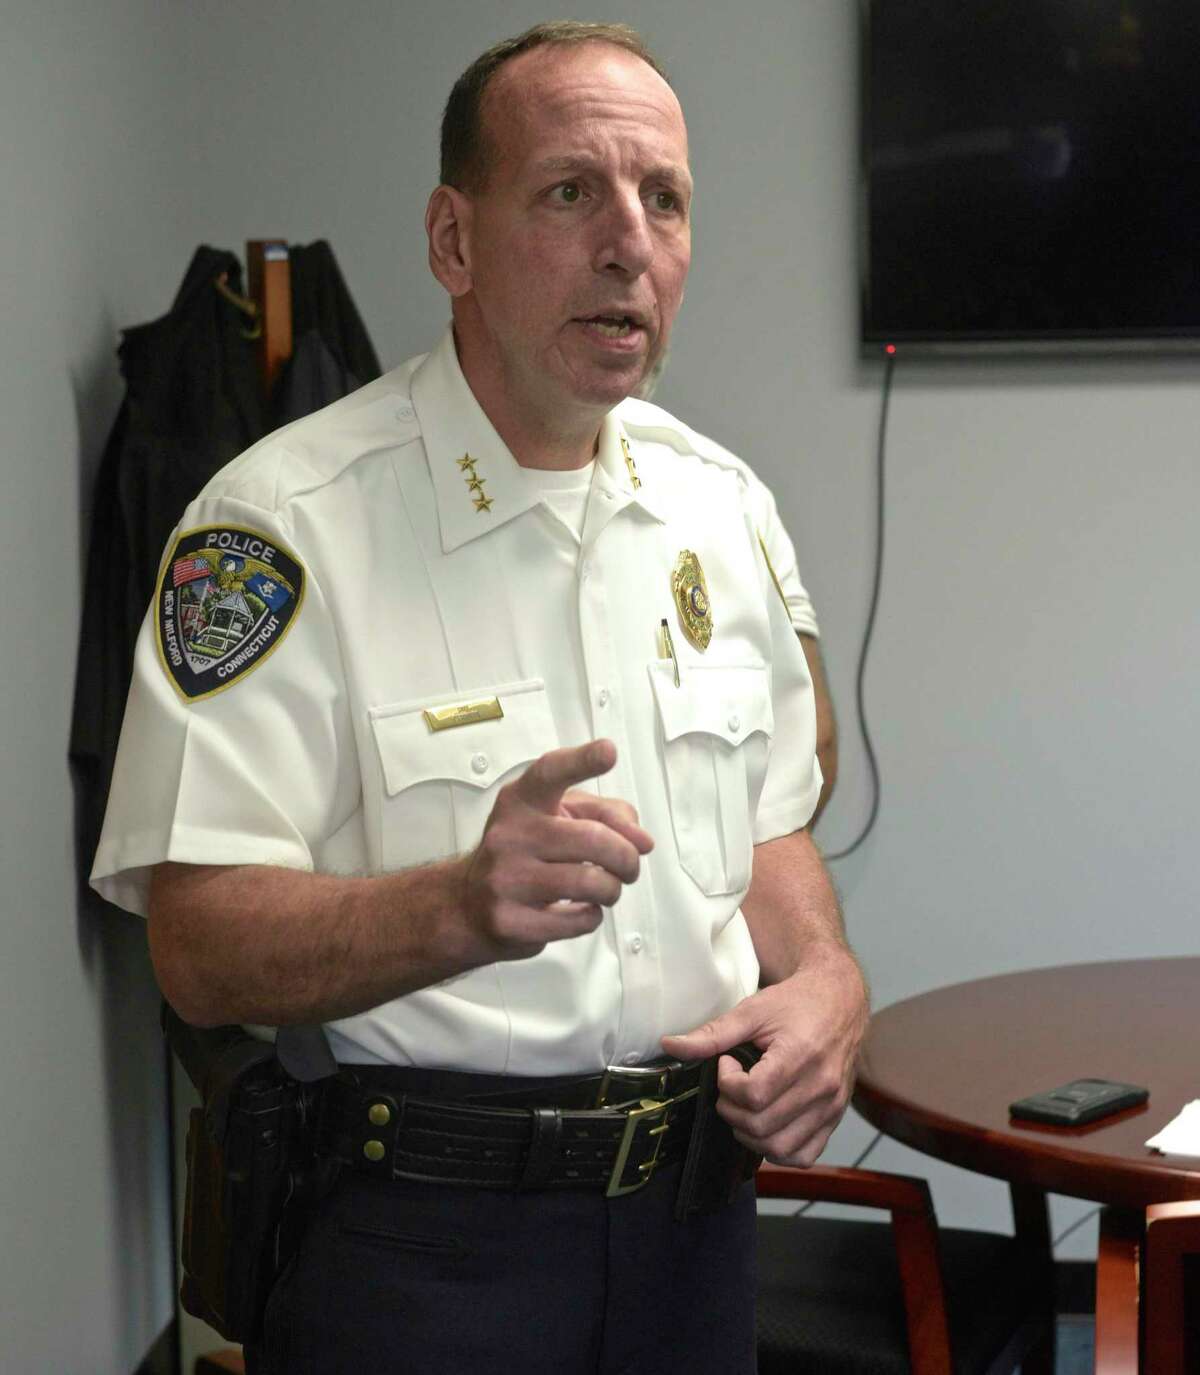 New Milford Police Chief Spencer Cerrito said catalytic converter thefts are taking place mainly in the Route 7 corridor.